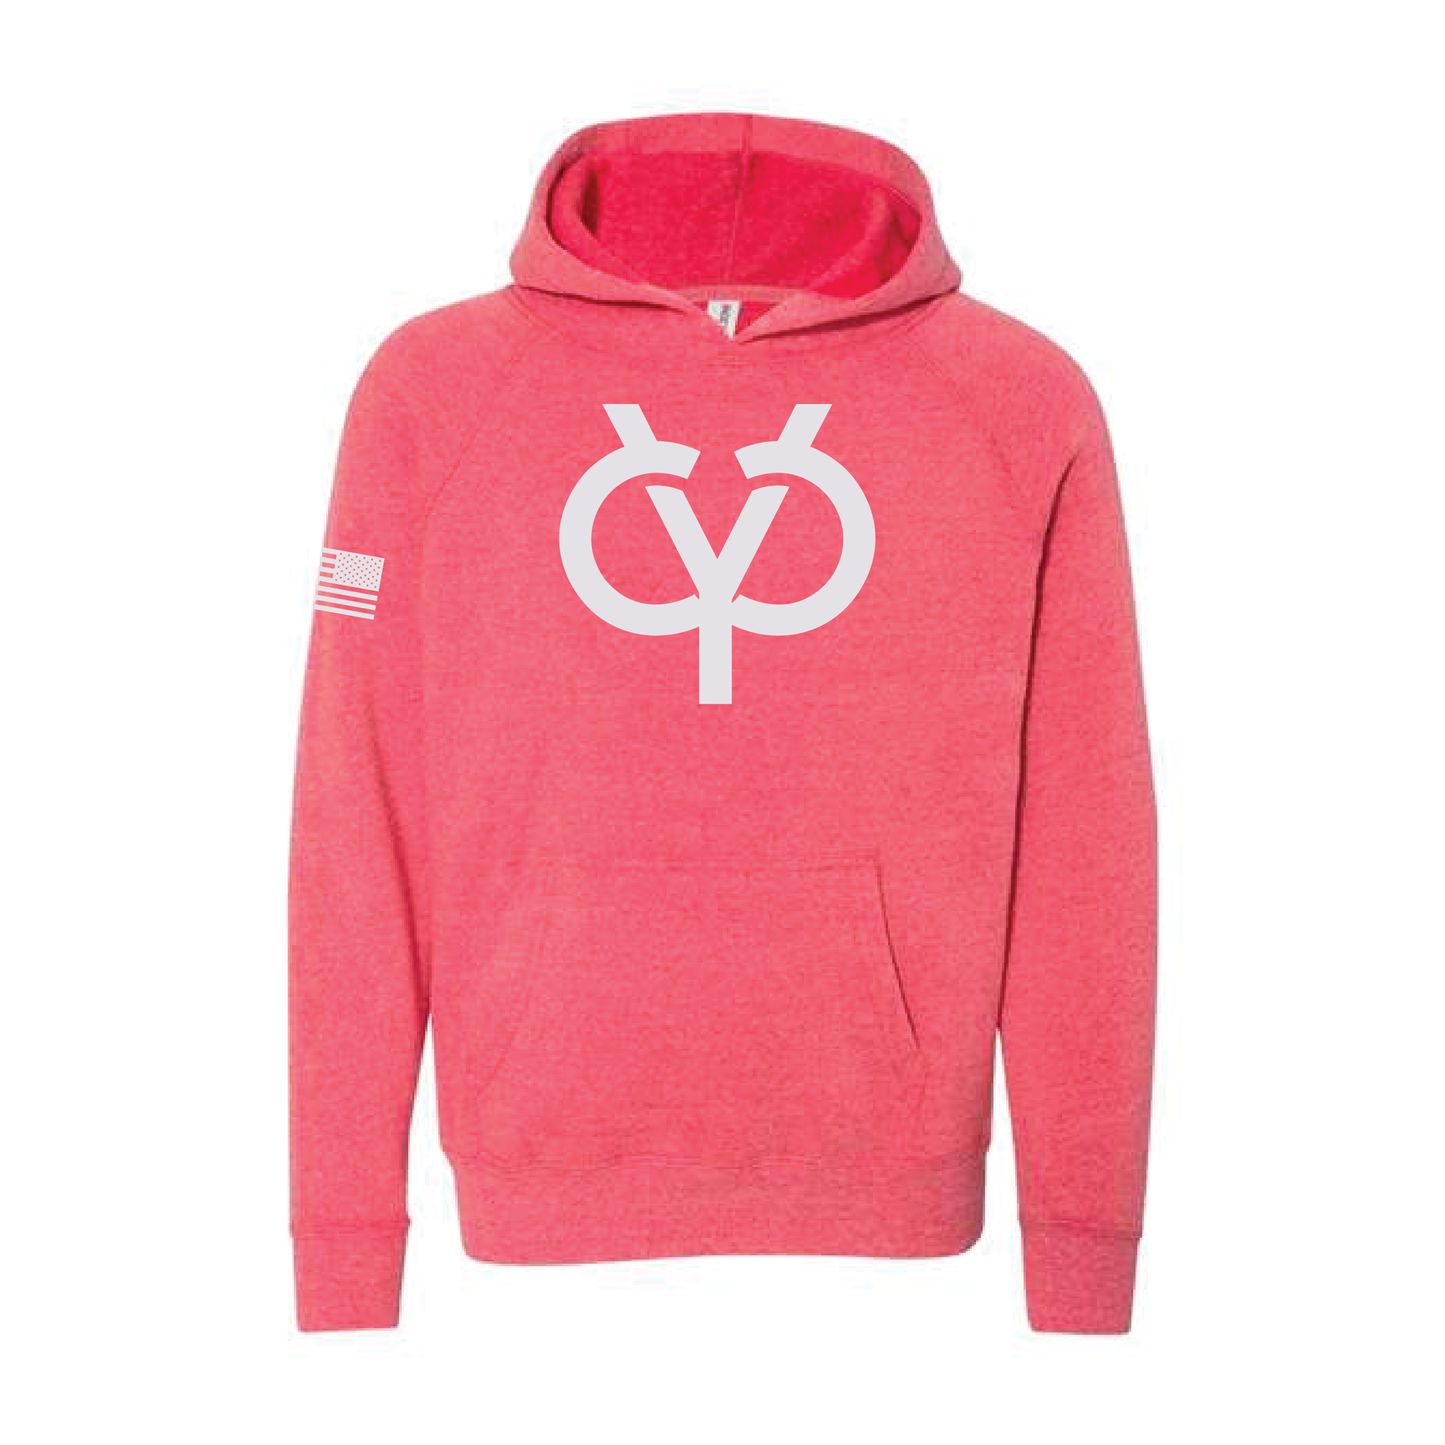 Patriotic CYC Brand - Youth Pullover Hoodie